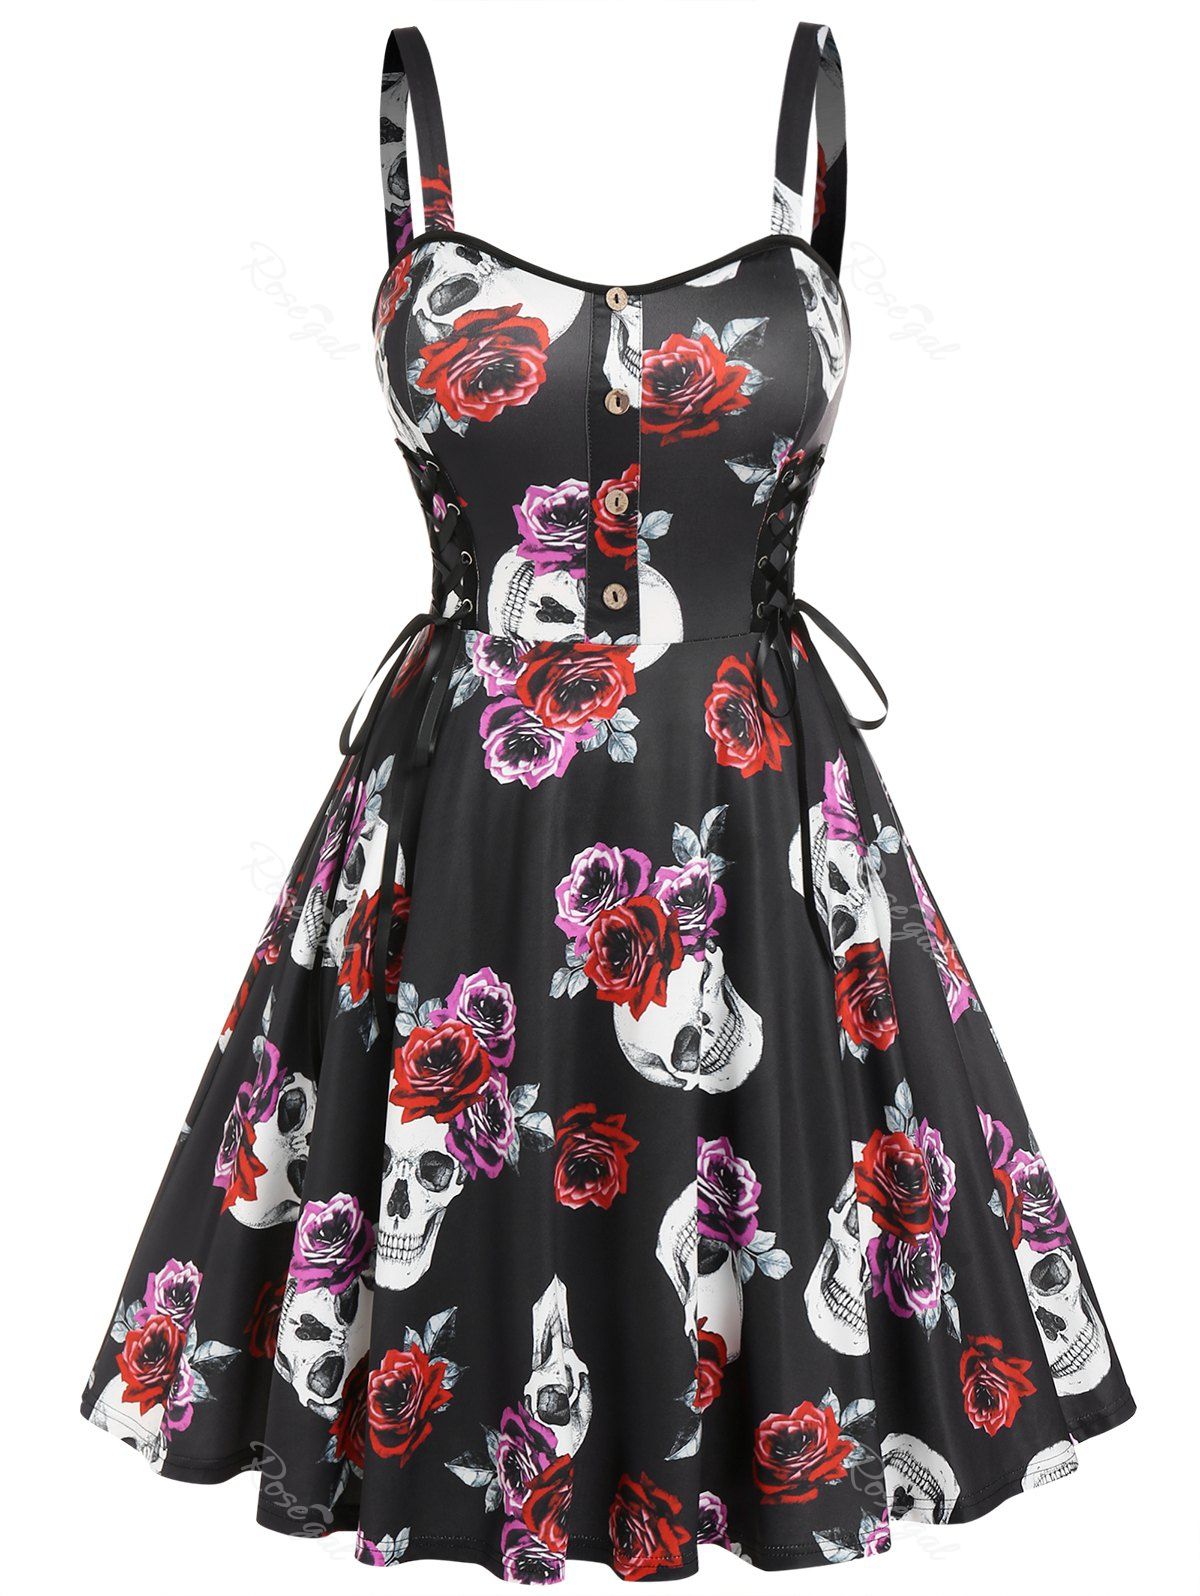 Chic Plus  Size Rose Skull Print Lace Up Dress  